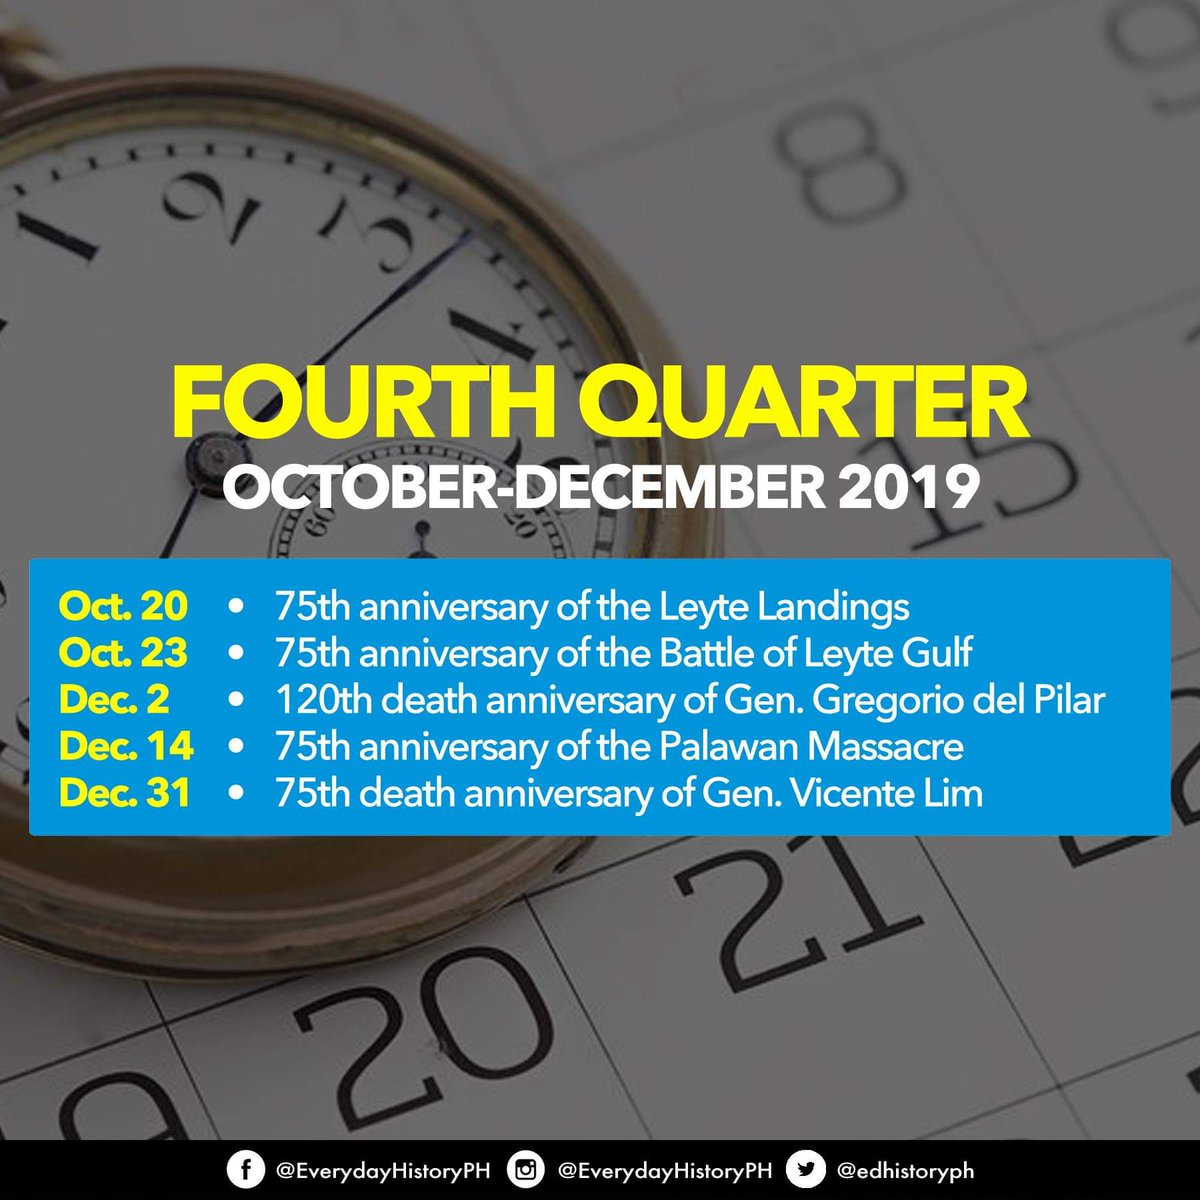 Take a look at some of the historical milestones and anniversaries in the Philippines to look forward to this year!

#EverydayHistory #HistoricalMilestones #PhilippineCommemorations #PhilippineHistory